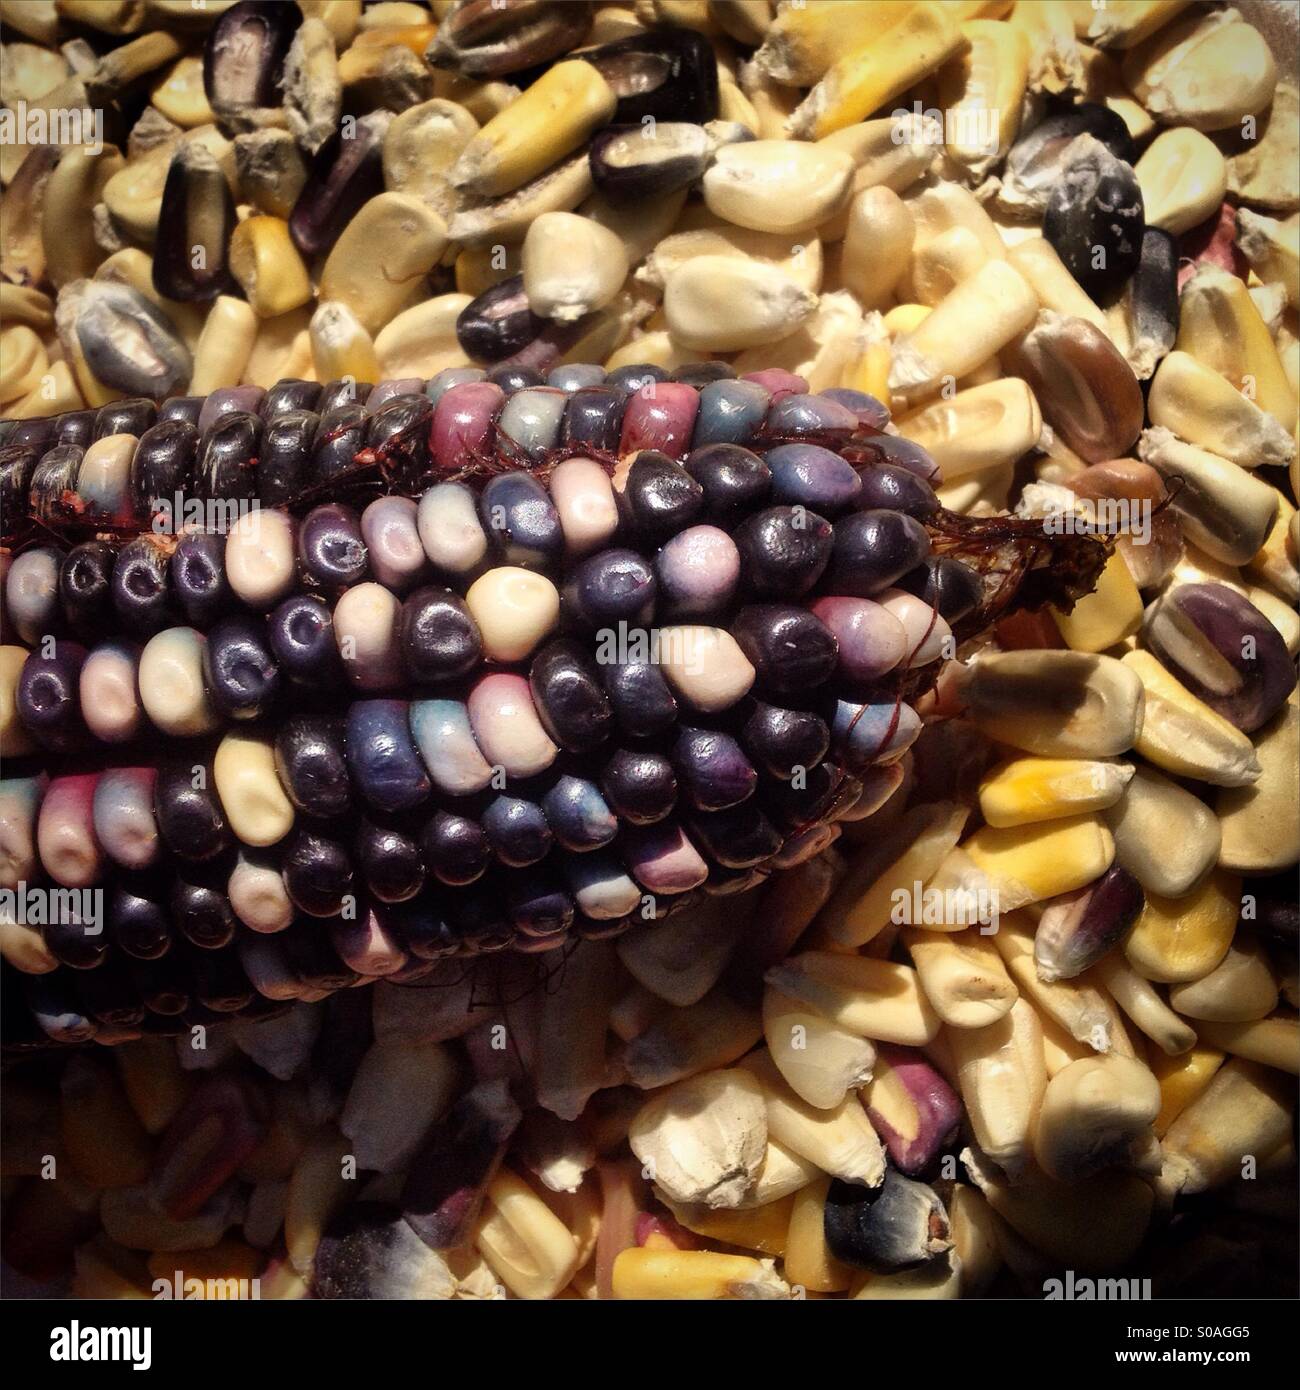 A multicolored corn cob in the seeds bank of organic farmer Tomás Villanueva in Tepetlixpa, Mexico State, Mexico. GMO seeds are threatening to contaminate native varieties of corn in México. Stock Photo